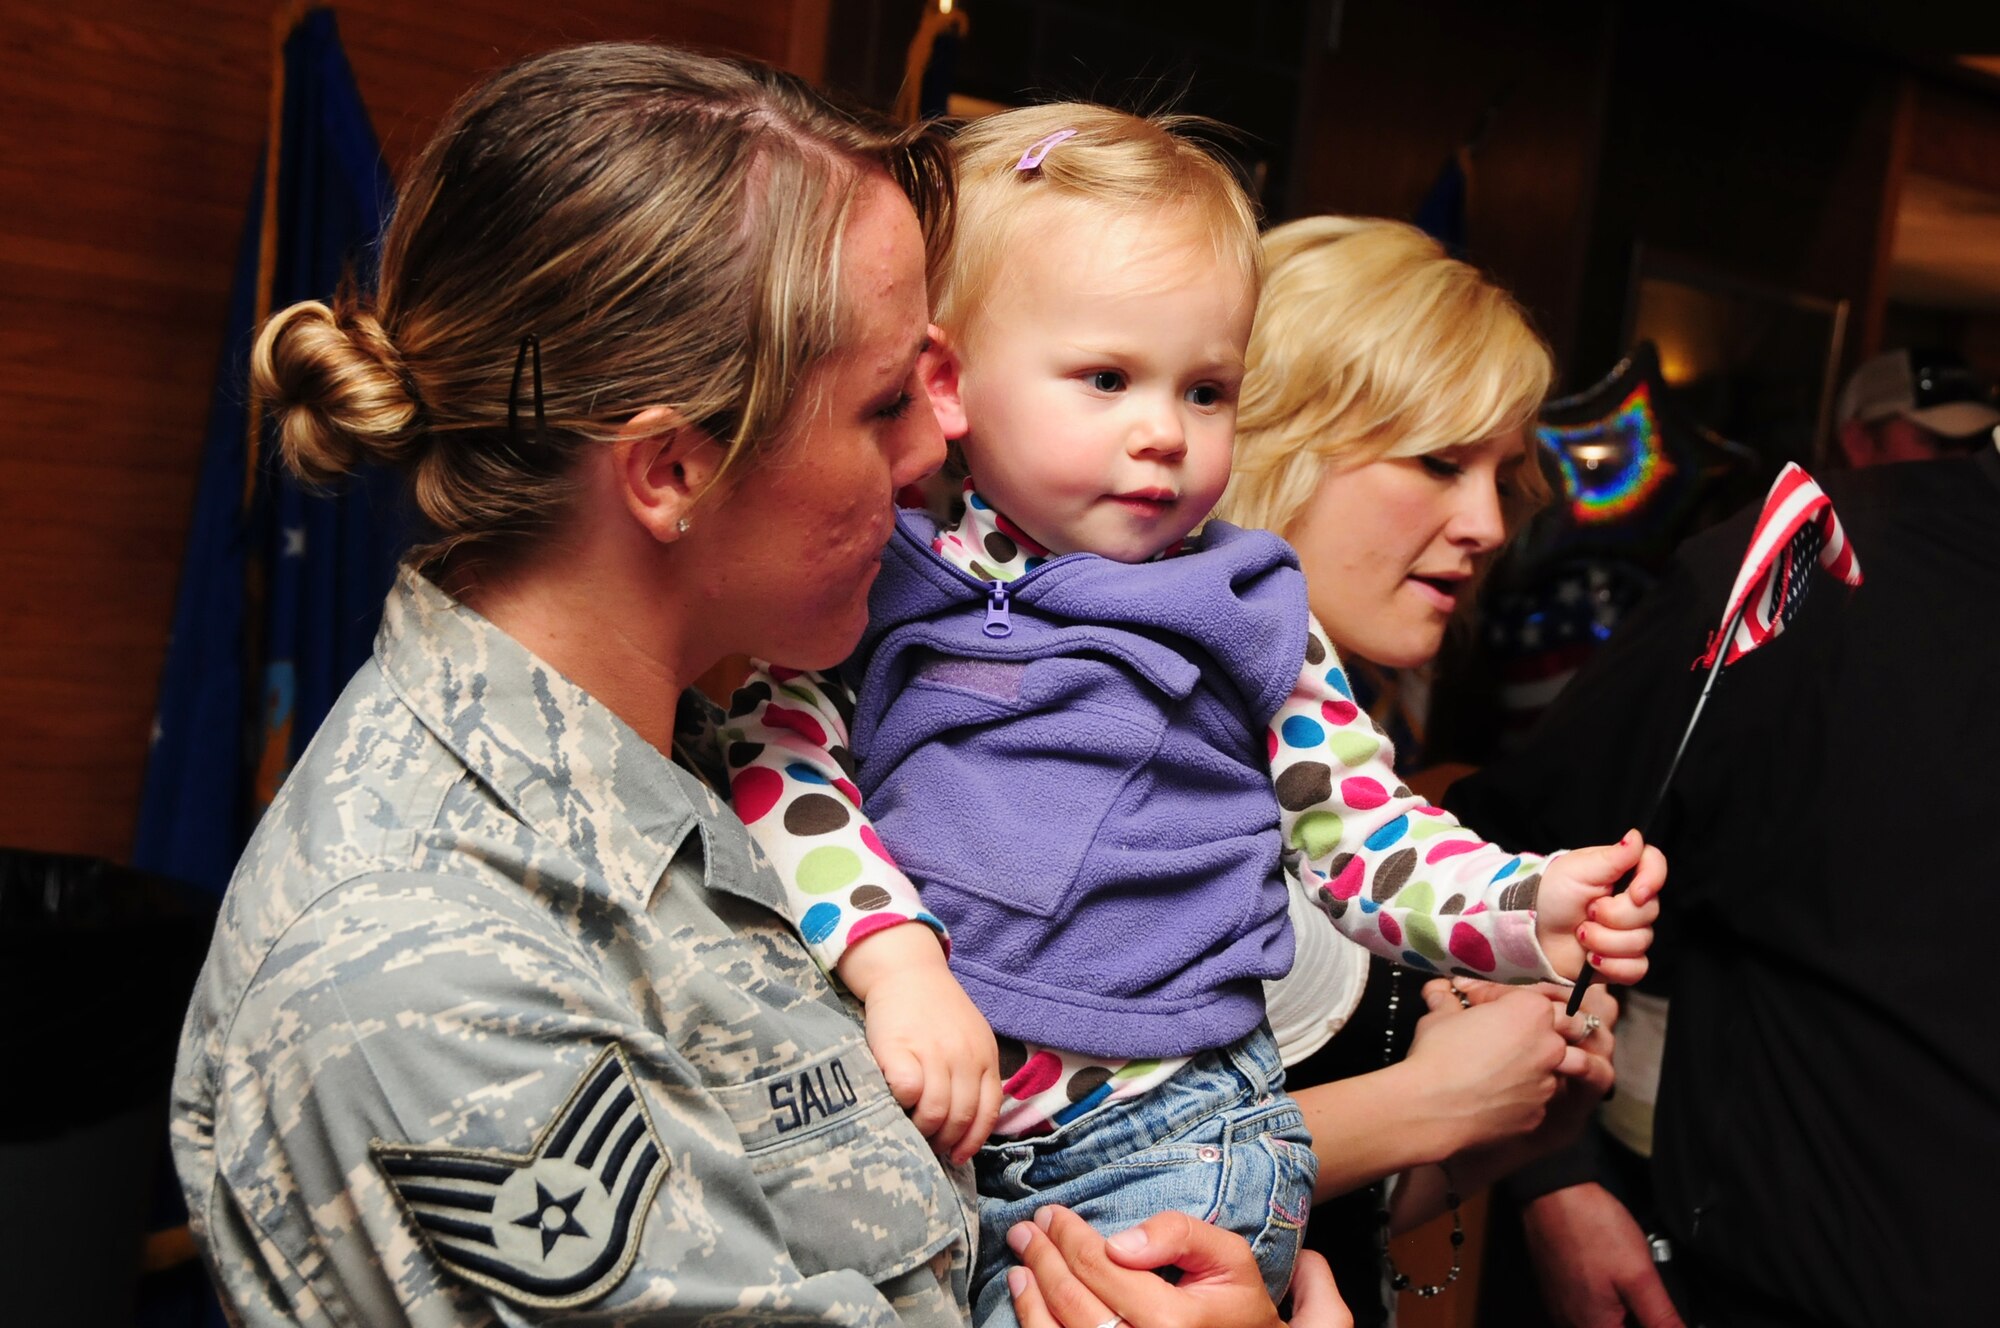 U.S. Air Force Staff Sgt. Jessica Salo, 148th Fighter Wing Security Forces, is reunited with her niece and other family members at the Duluth, Minn., Air National Guard base May 13, 2010. Approximately 35 Air National Guard members of the 148th Fighter Wing Security Forces Squadron returned to Duluth, Minn., after a 6-month deployment in southwest Asia. (U.S. Air Force photo by Master Sgt. Jason W. Rolfe/Released) 